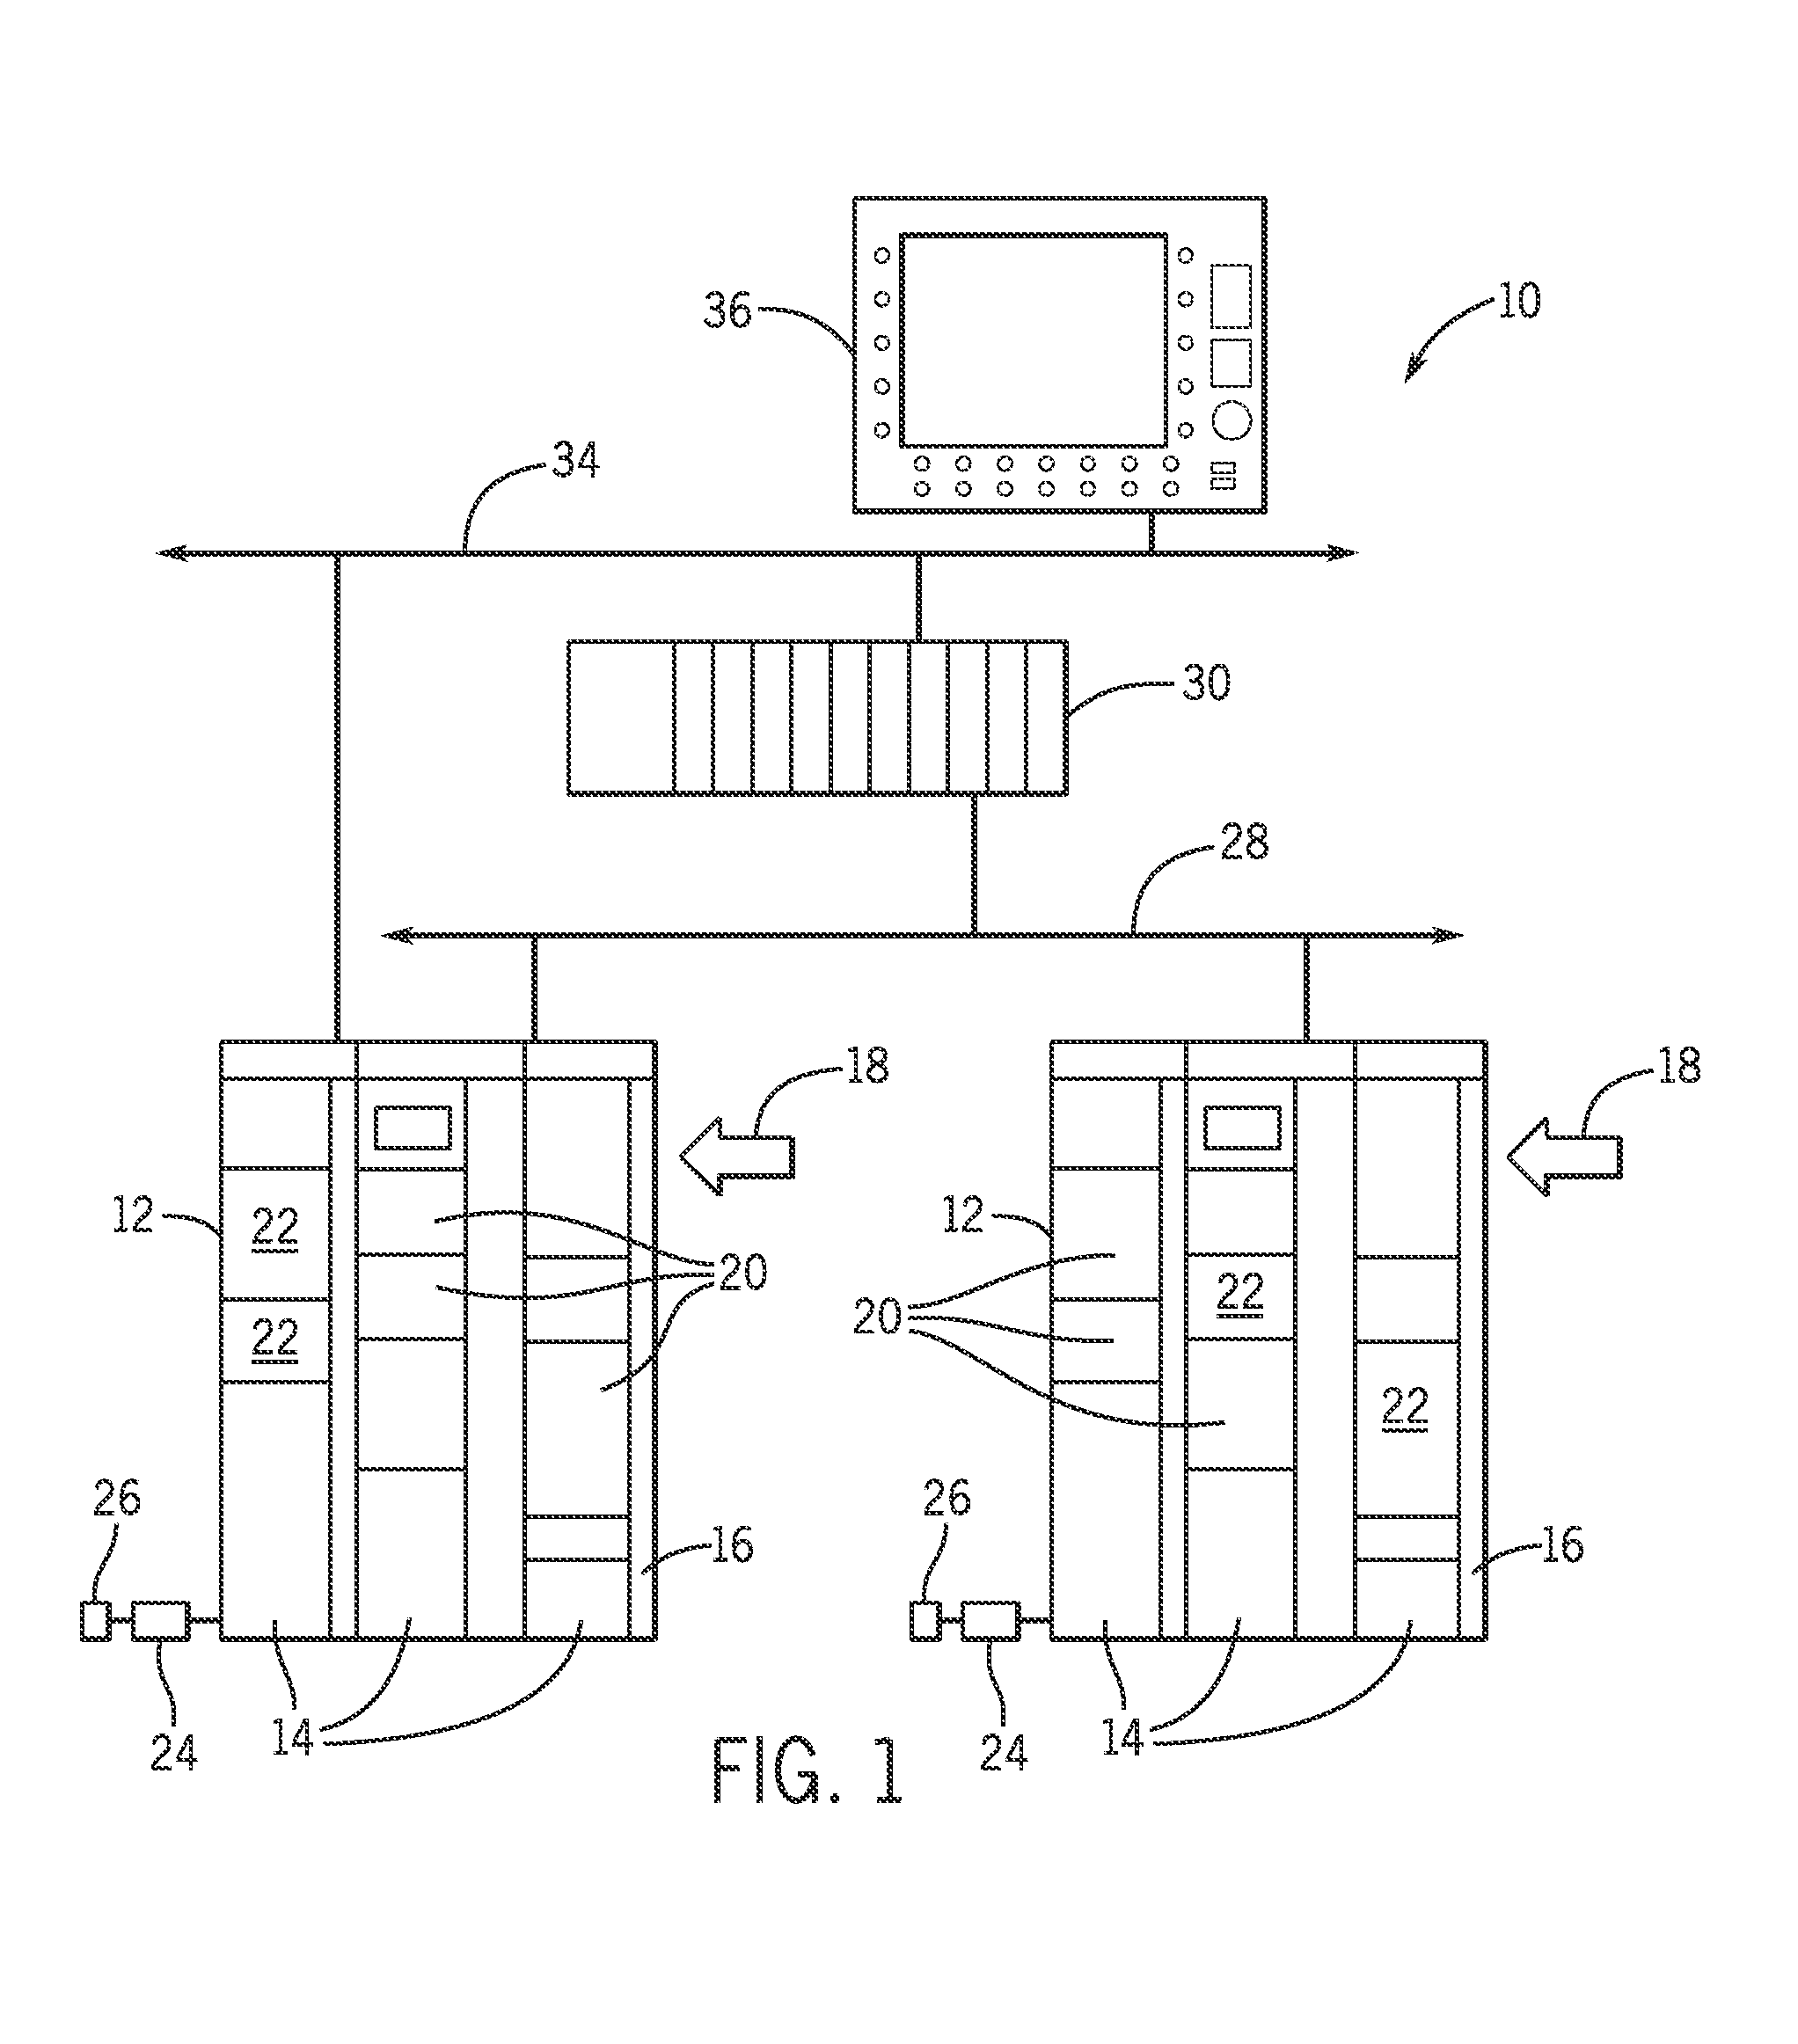 Electrical component remote temperature monitoring system and method